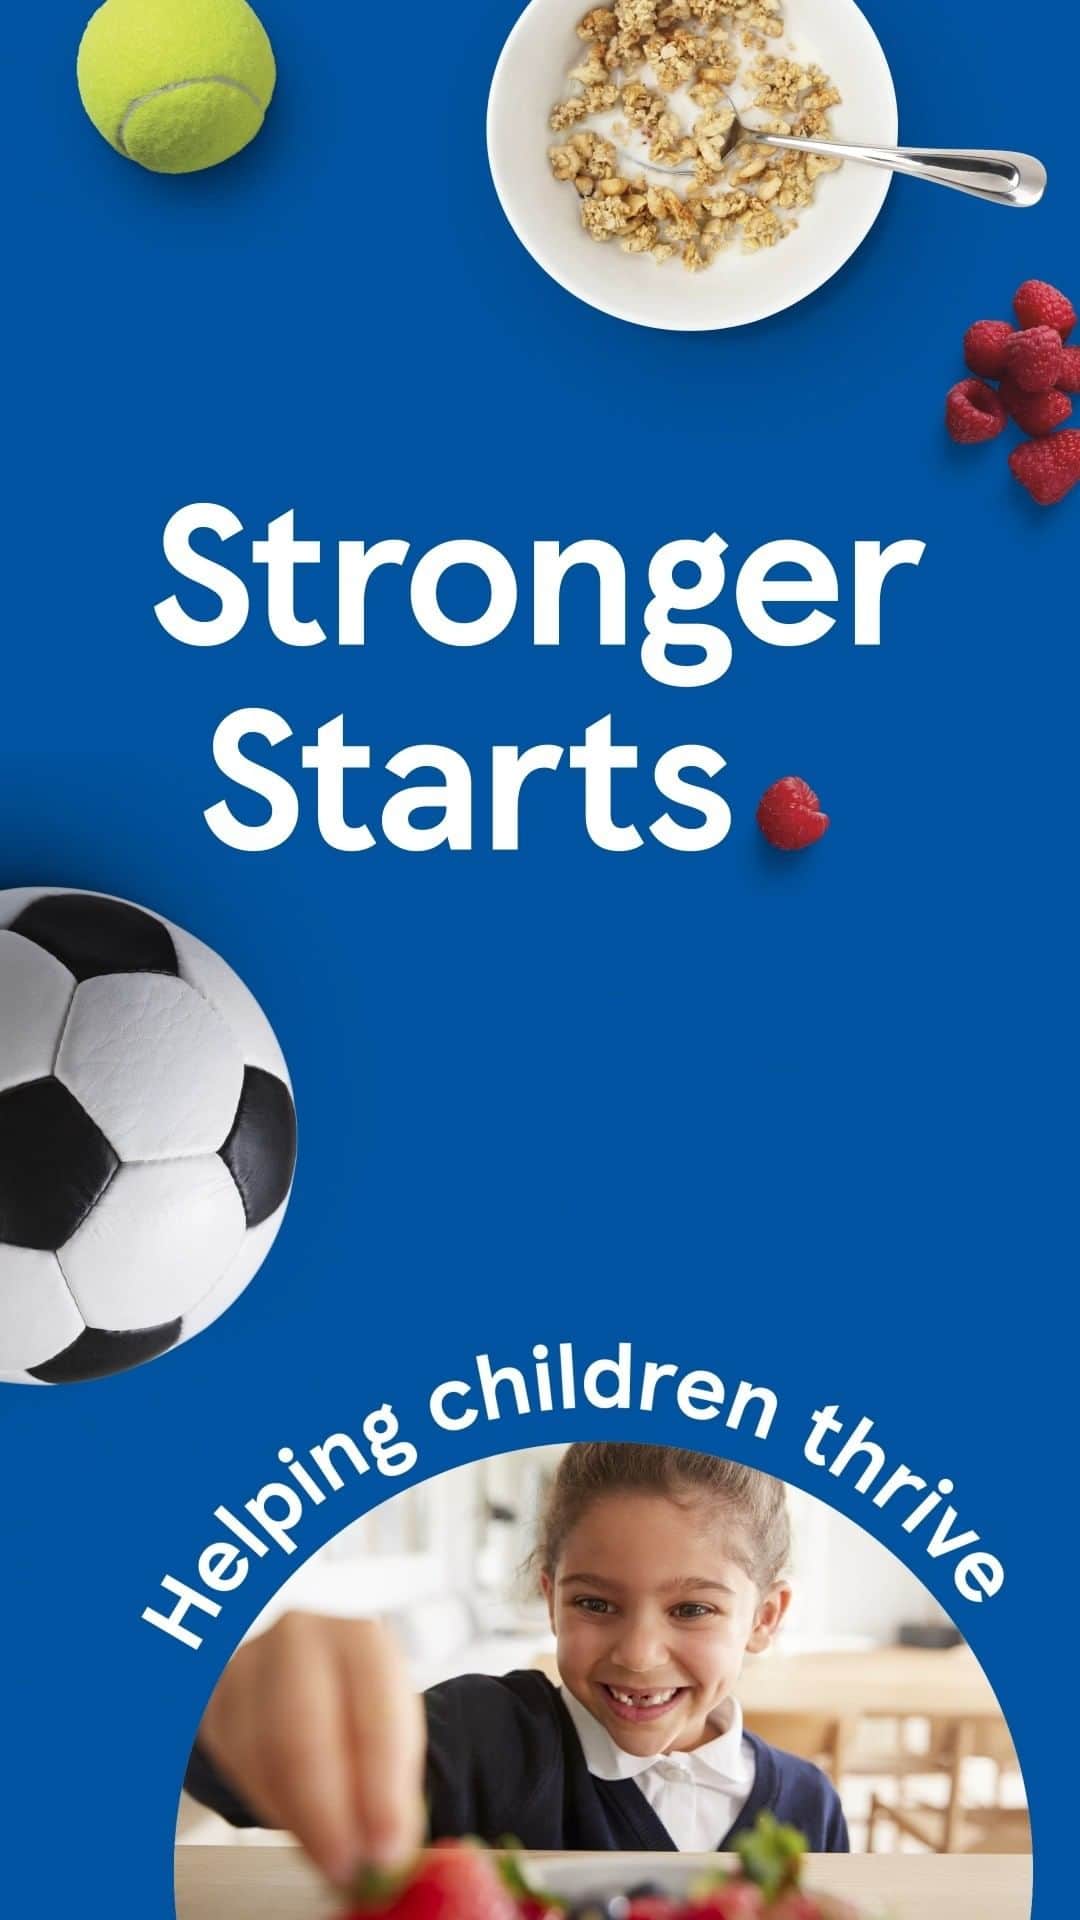 Tesco Food Officialのインスタグラム：「Sometimes, children need a helping hand to dream big. That's why Tesco Stronger Starts is committing £5m to fund over 5,000 children's groups by July 2024. Pick up your blue token in-store to help fund healthy food and activities for kids in your area. Click the link in bio to find out more.」